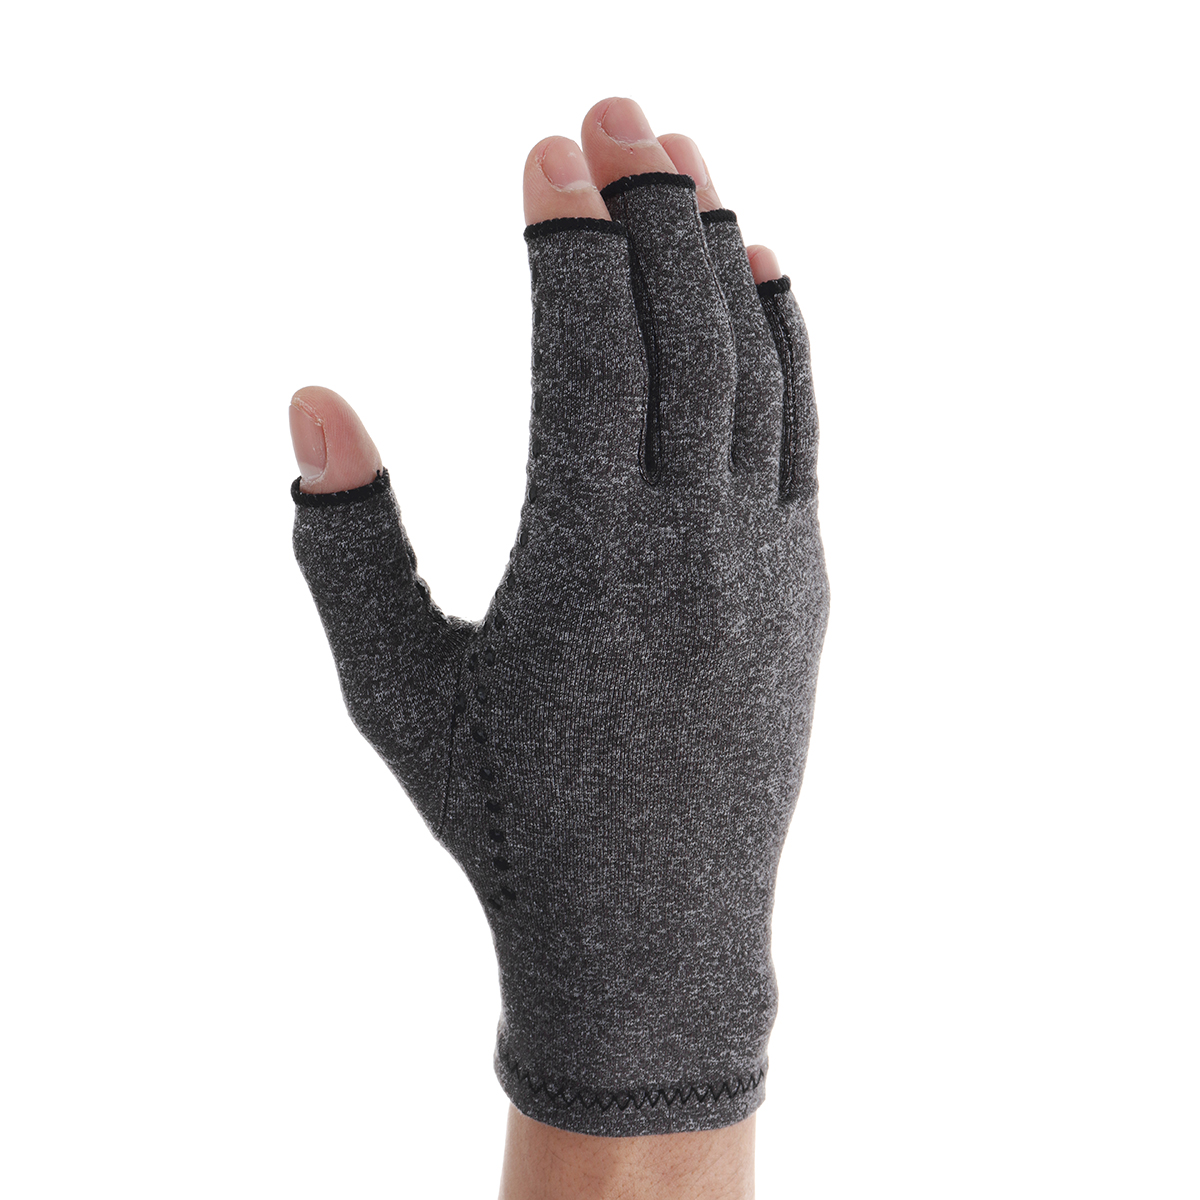 1-Pair-Anti-Arthritis-Gloves-Ease-Pain-Relief-Compression-Gloves-Hand-Support-Outdoor-Fitness-Half-F-1427622-7